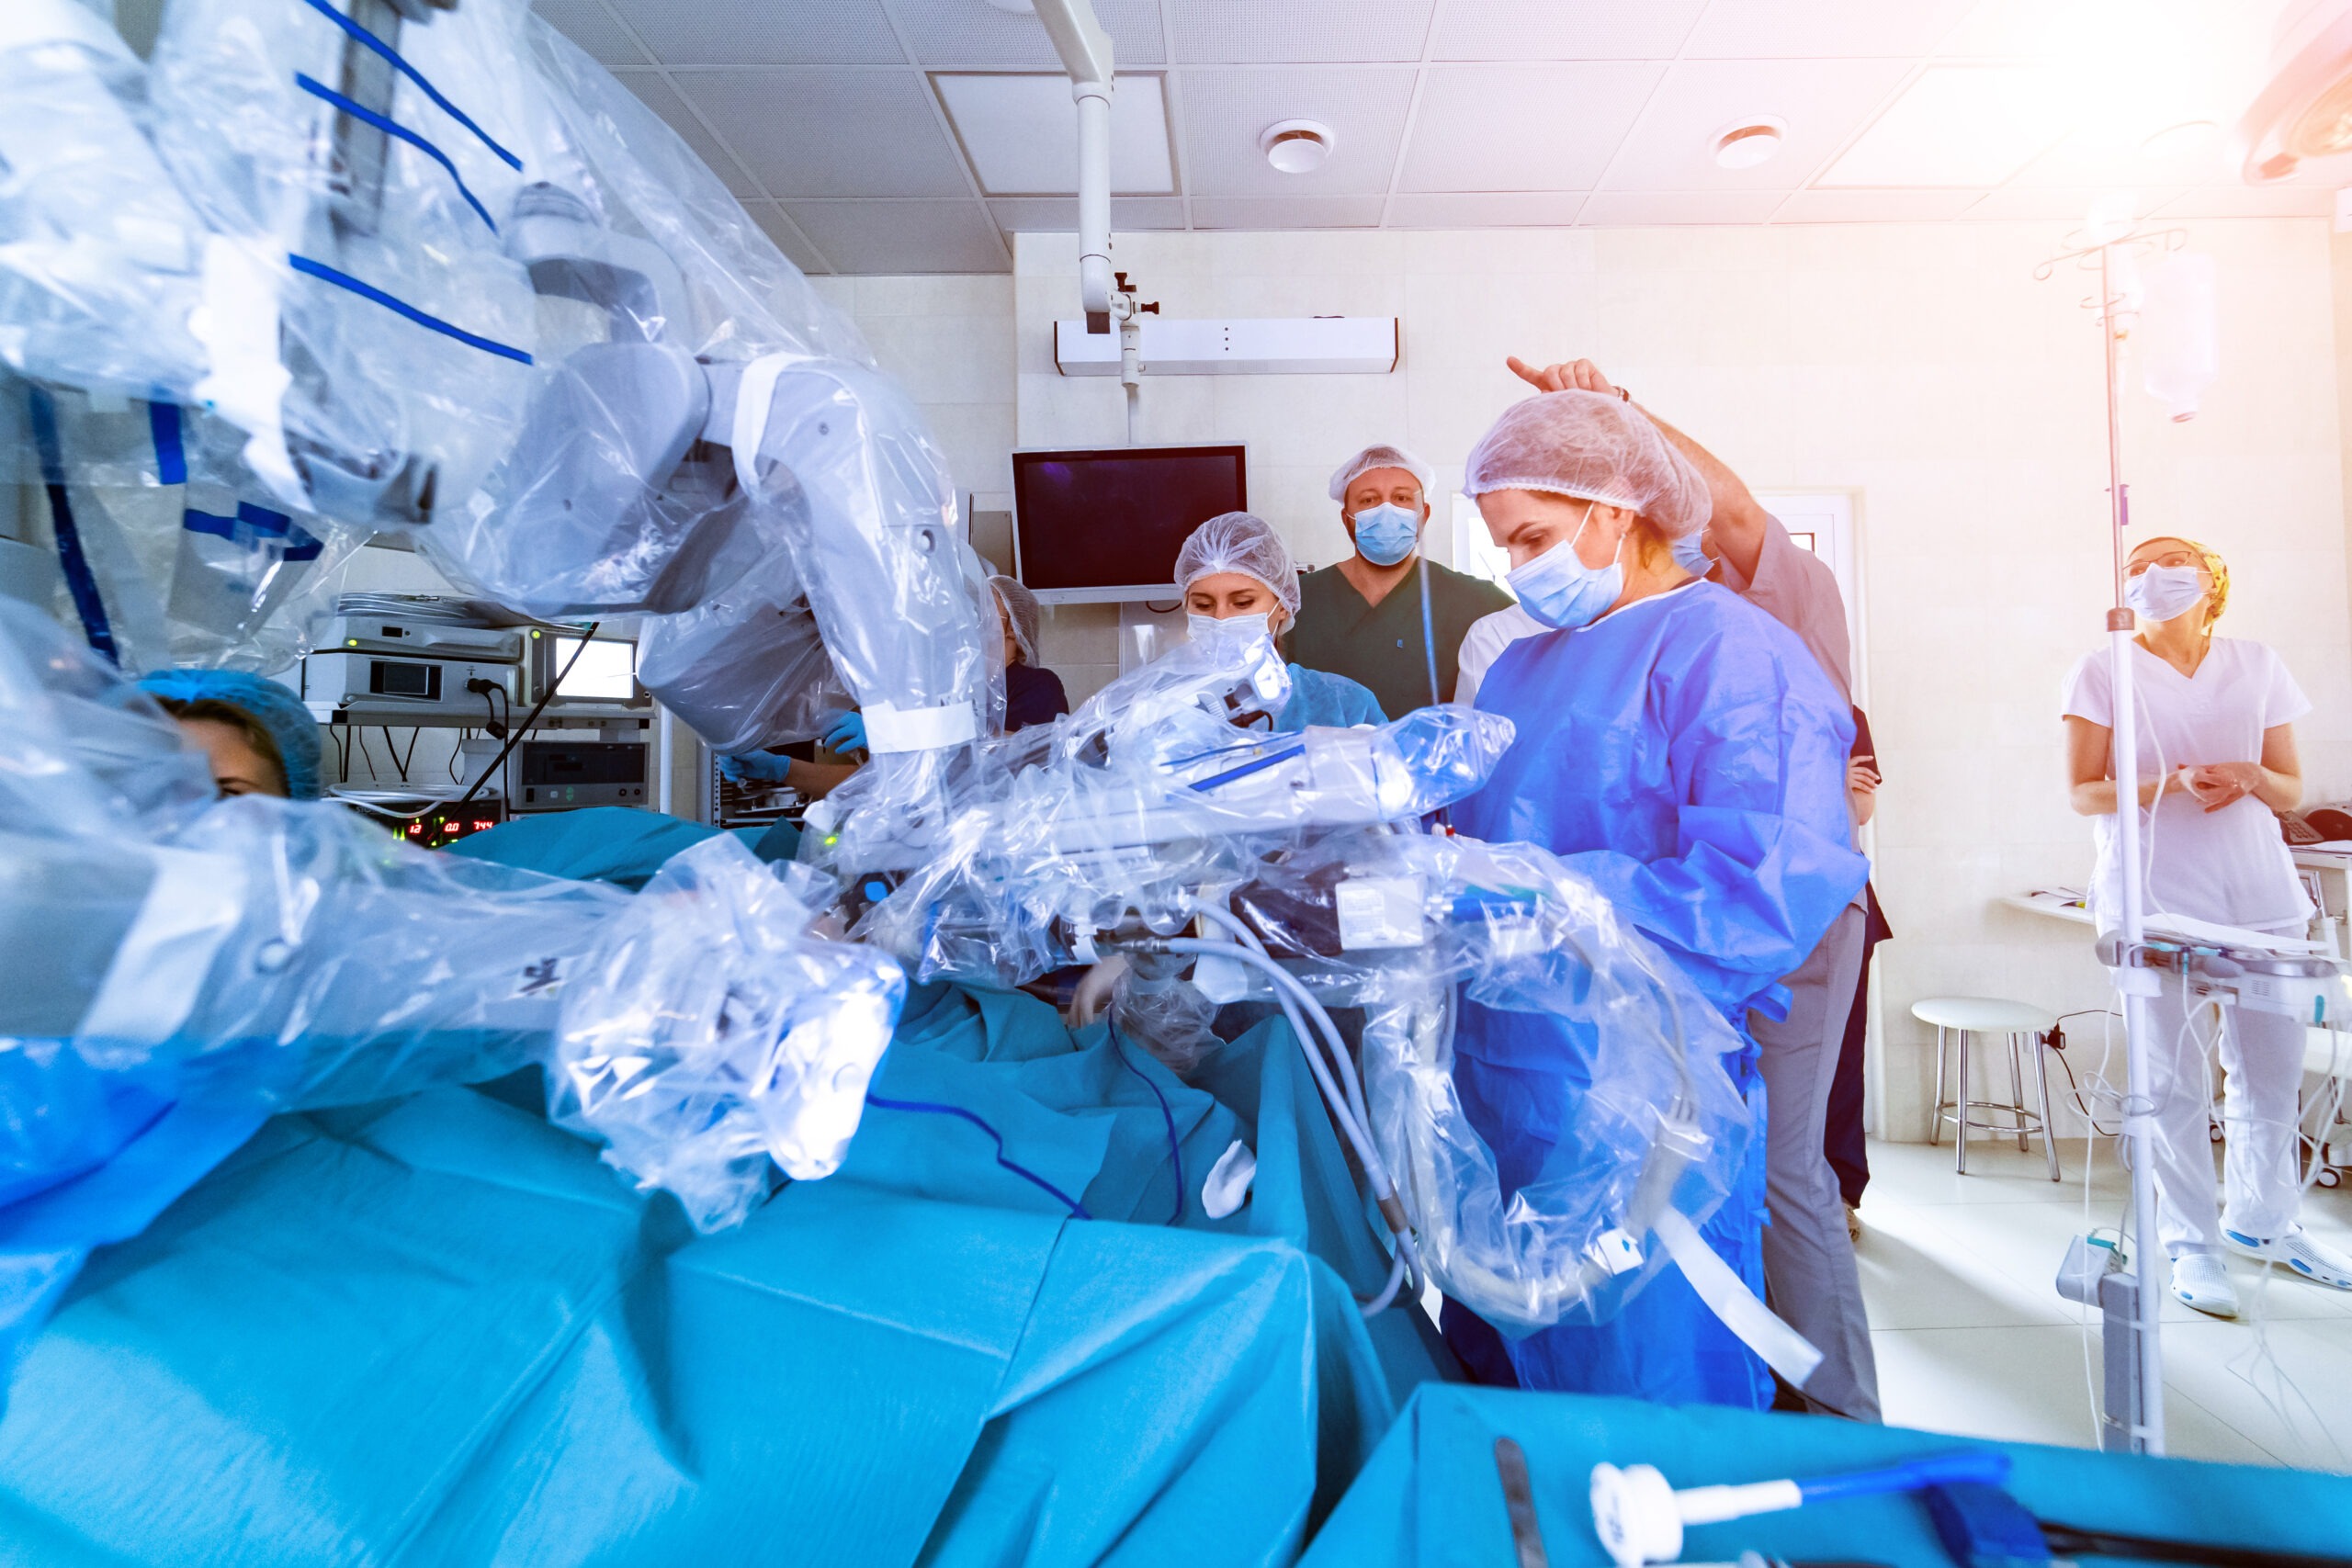 Robot surgery in an operating room